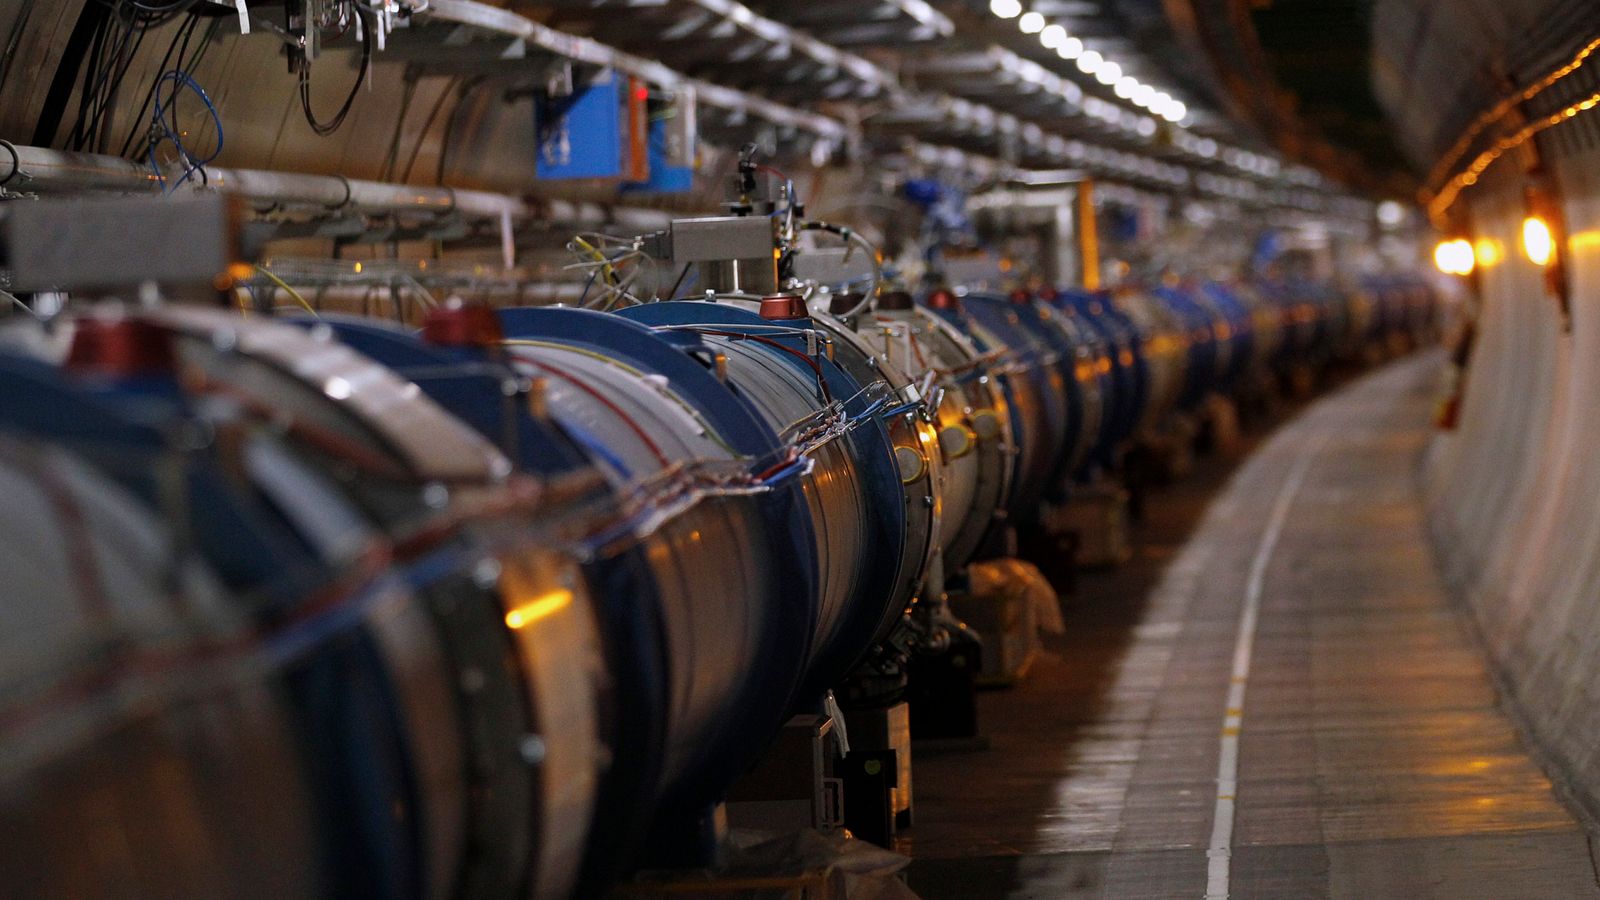 Giant successor to Hadron Collider could uncover secrets of 95% of the universe